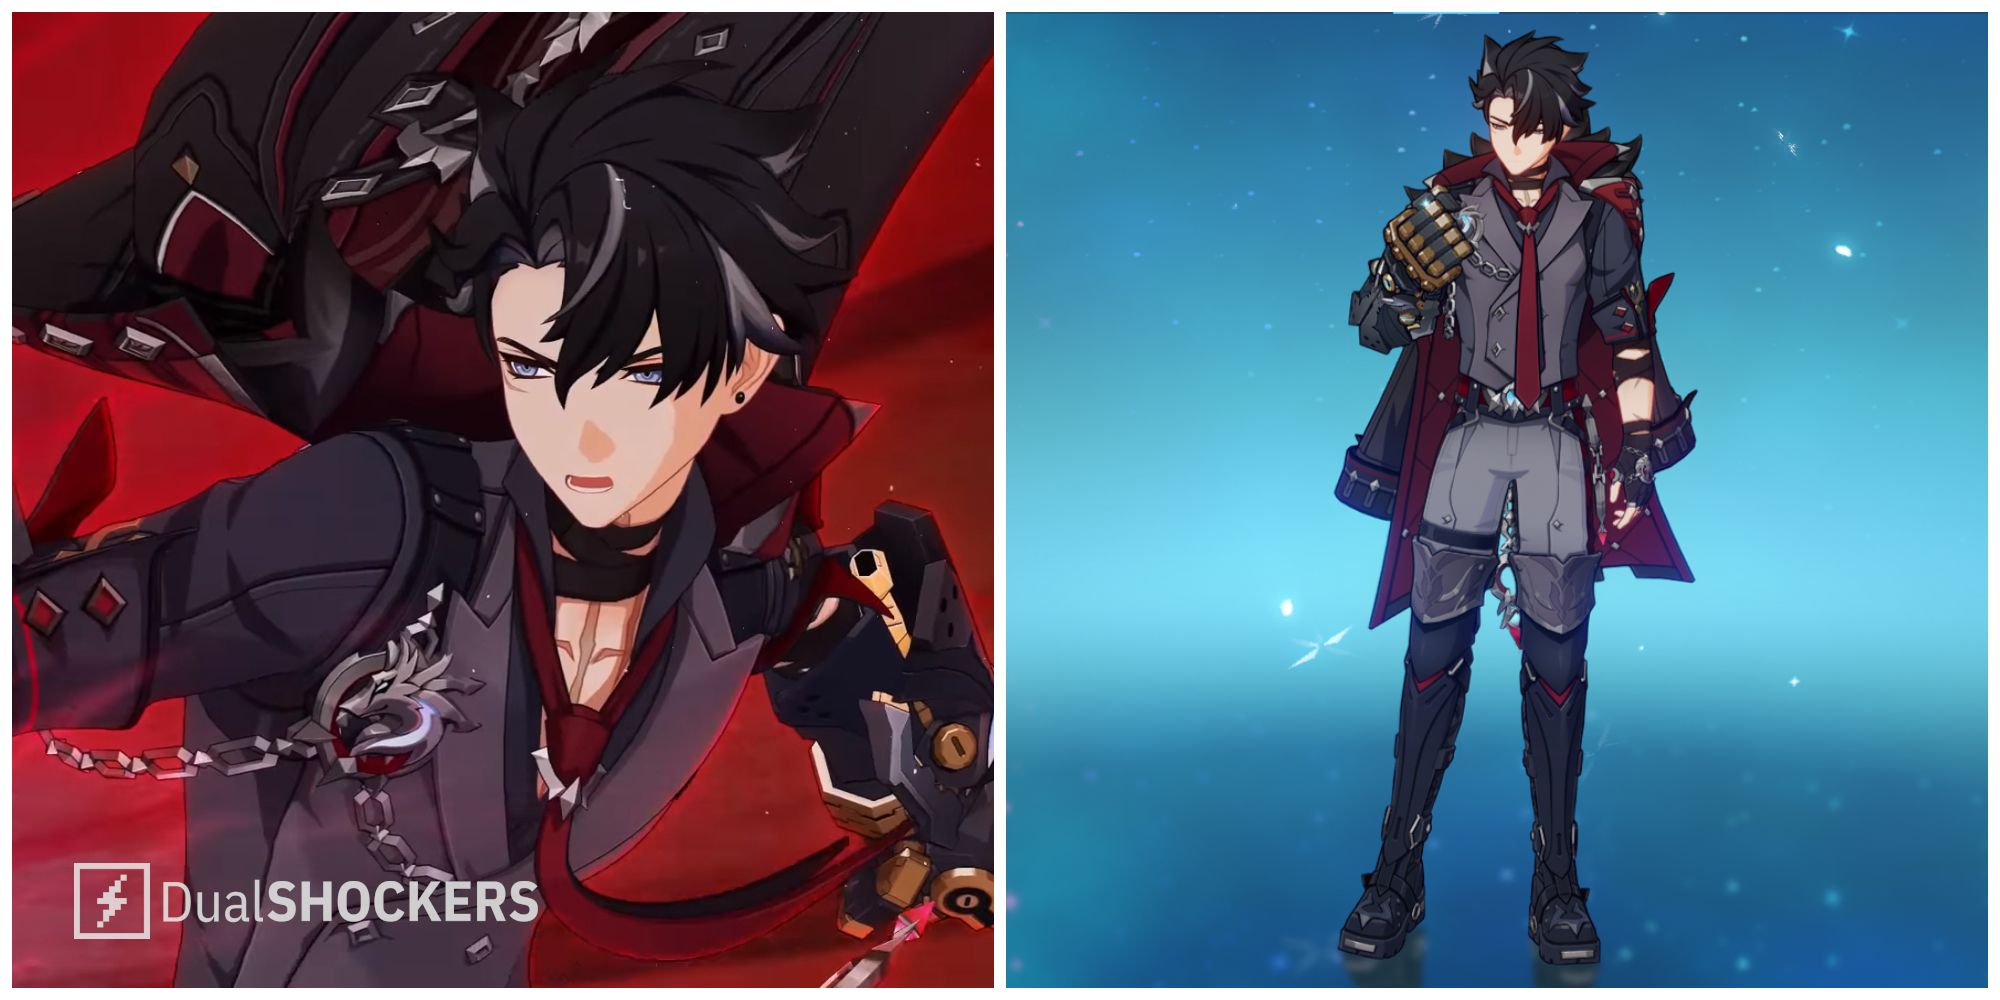 Split image of Wriothesley in a character demo and in his main profile page in Genshin Impact.